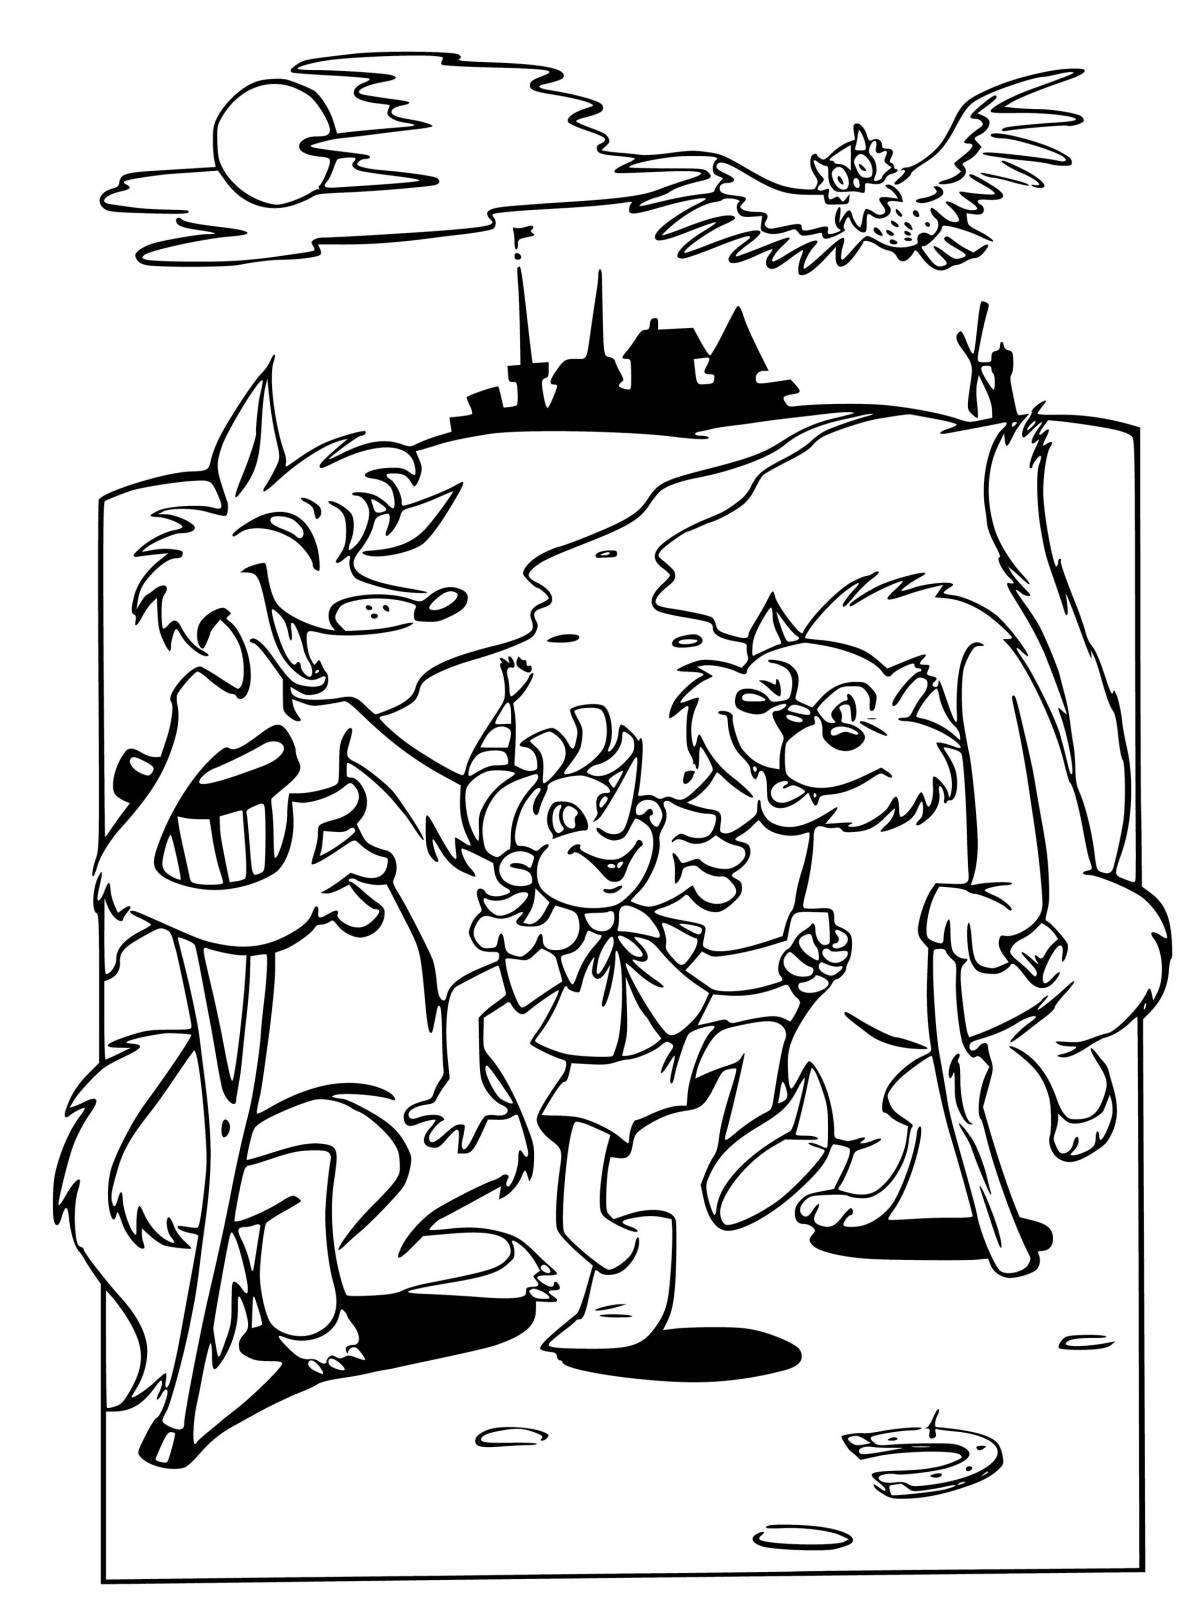 Colorful alice fox coloring page